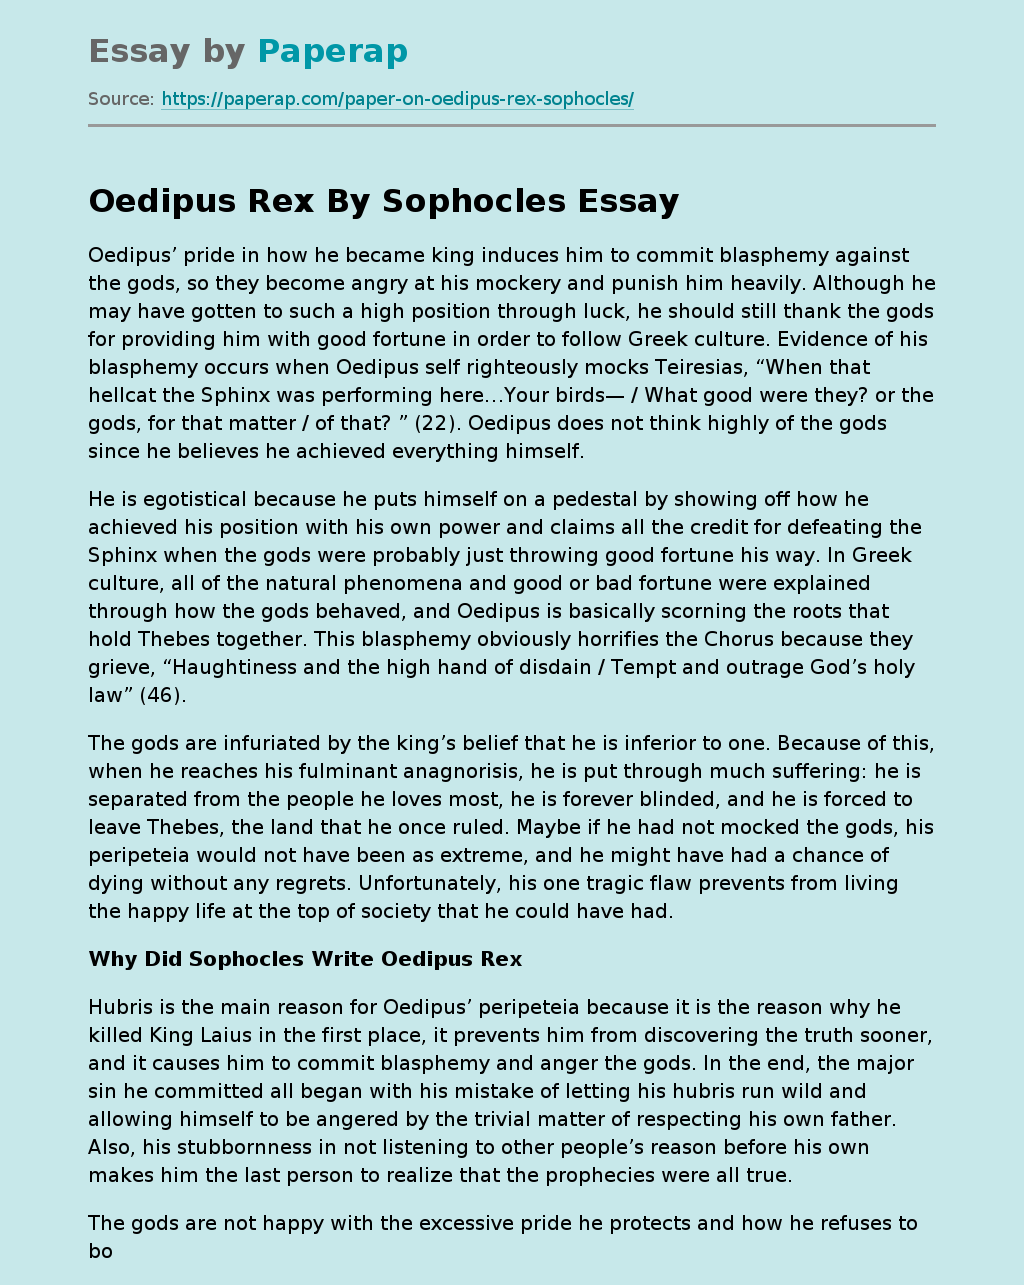 Oedipus Rex By Sophocles